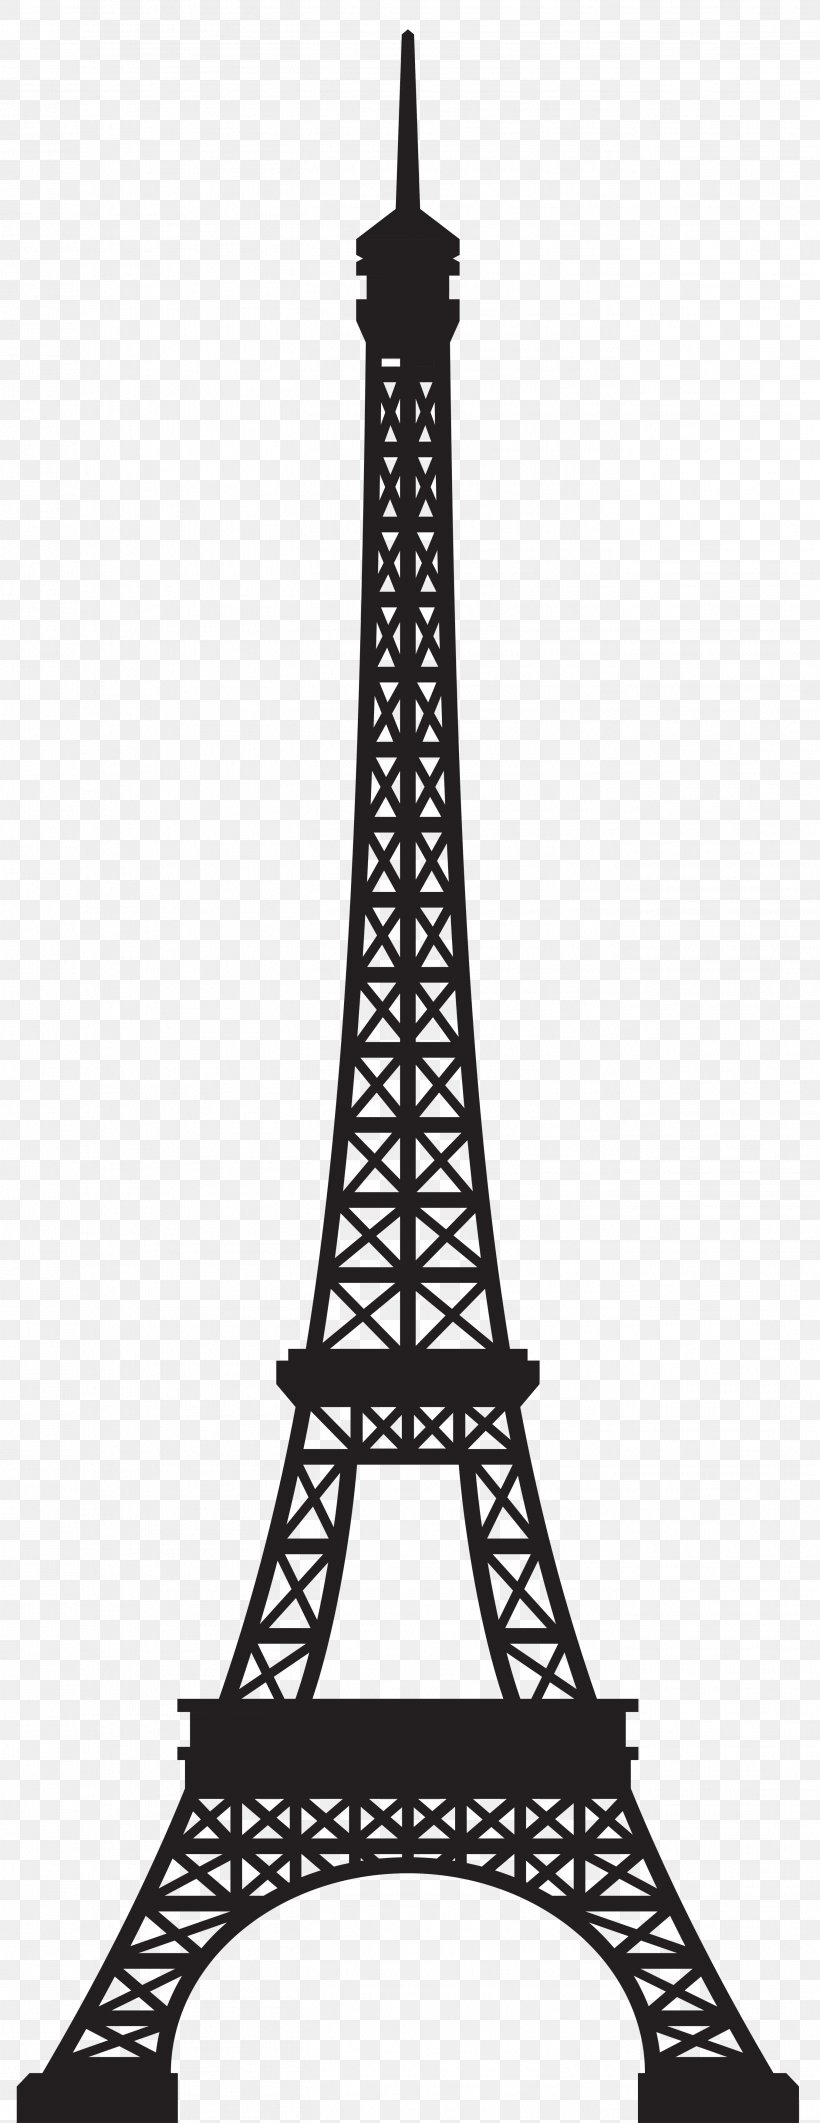 Eiffel Tower Landmark Clip Art, PNG, 2703x7000px, Eiffel Tower, Black, Black And White, Drawing, France Download Free